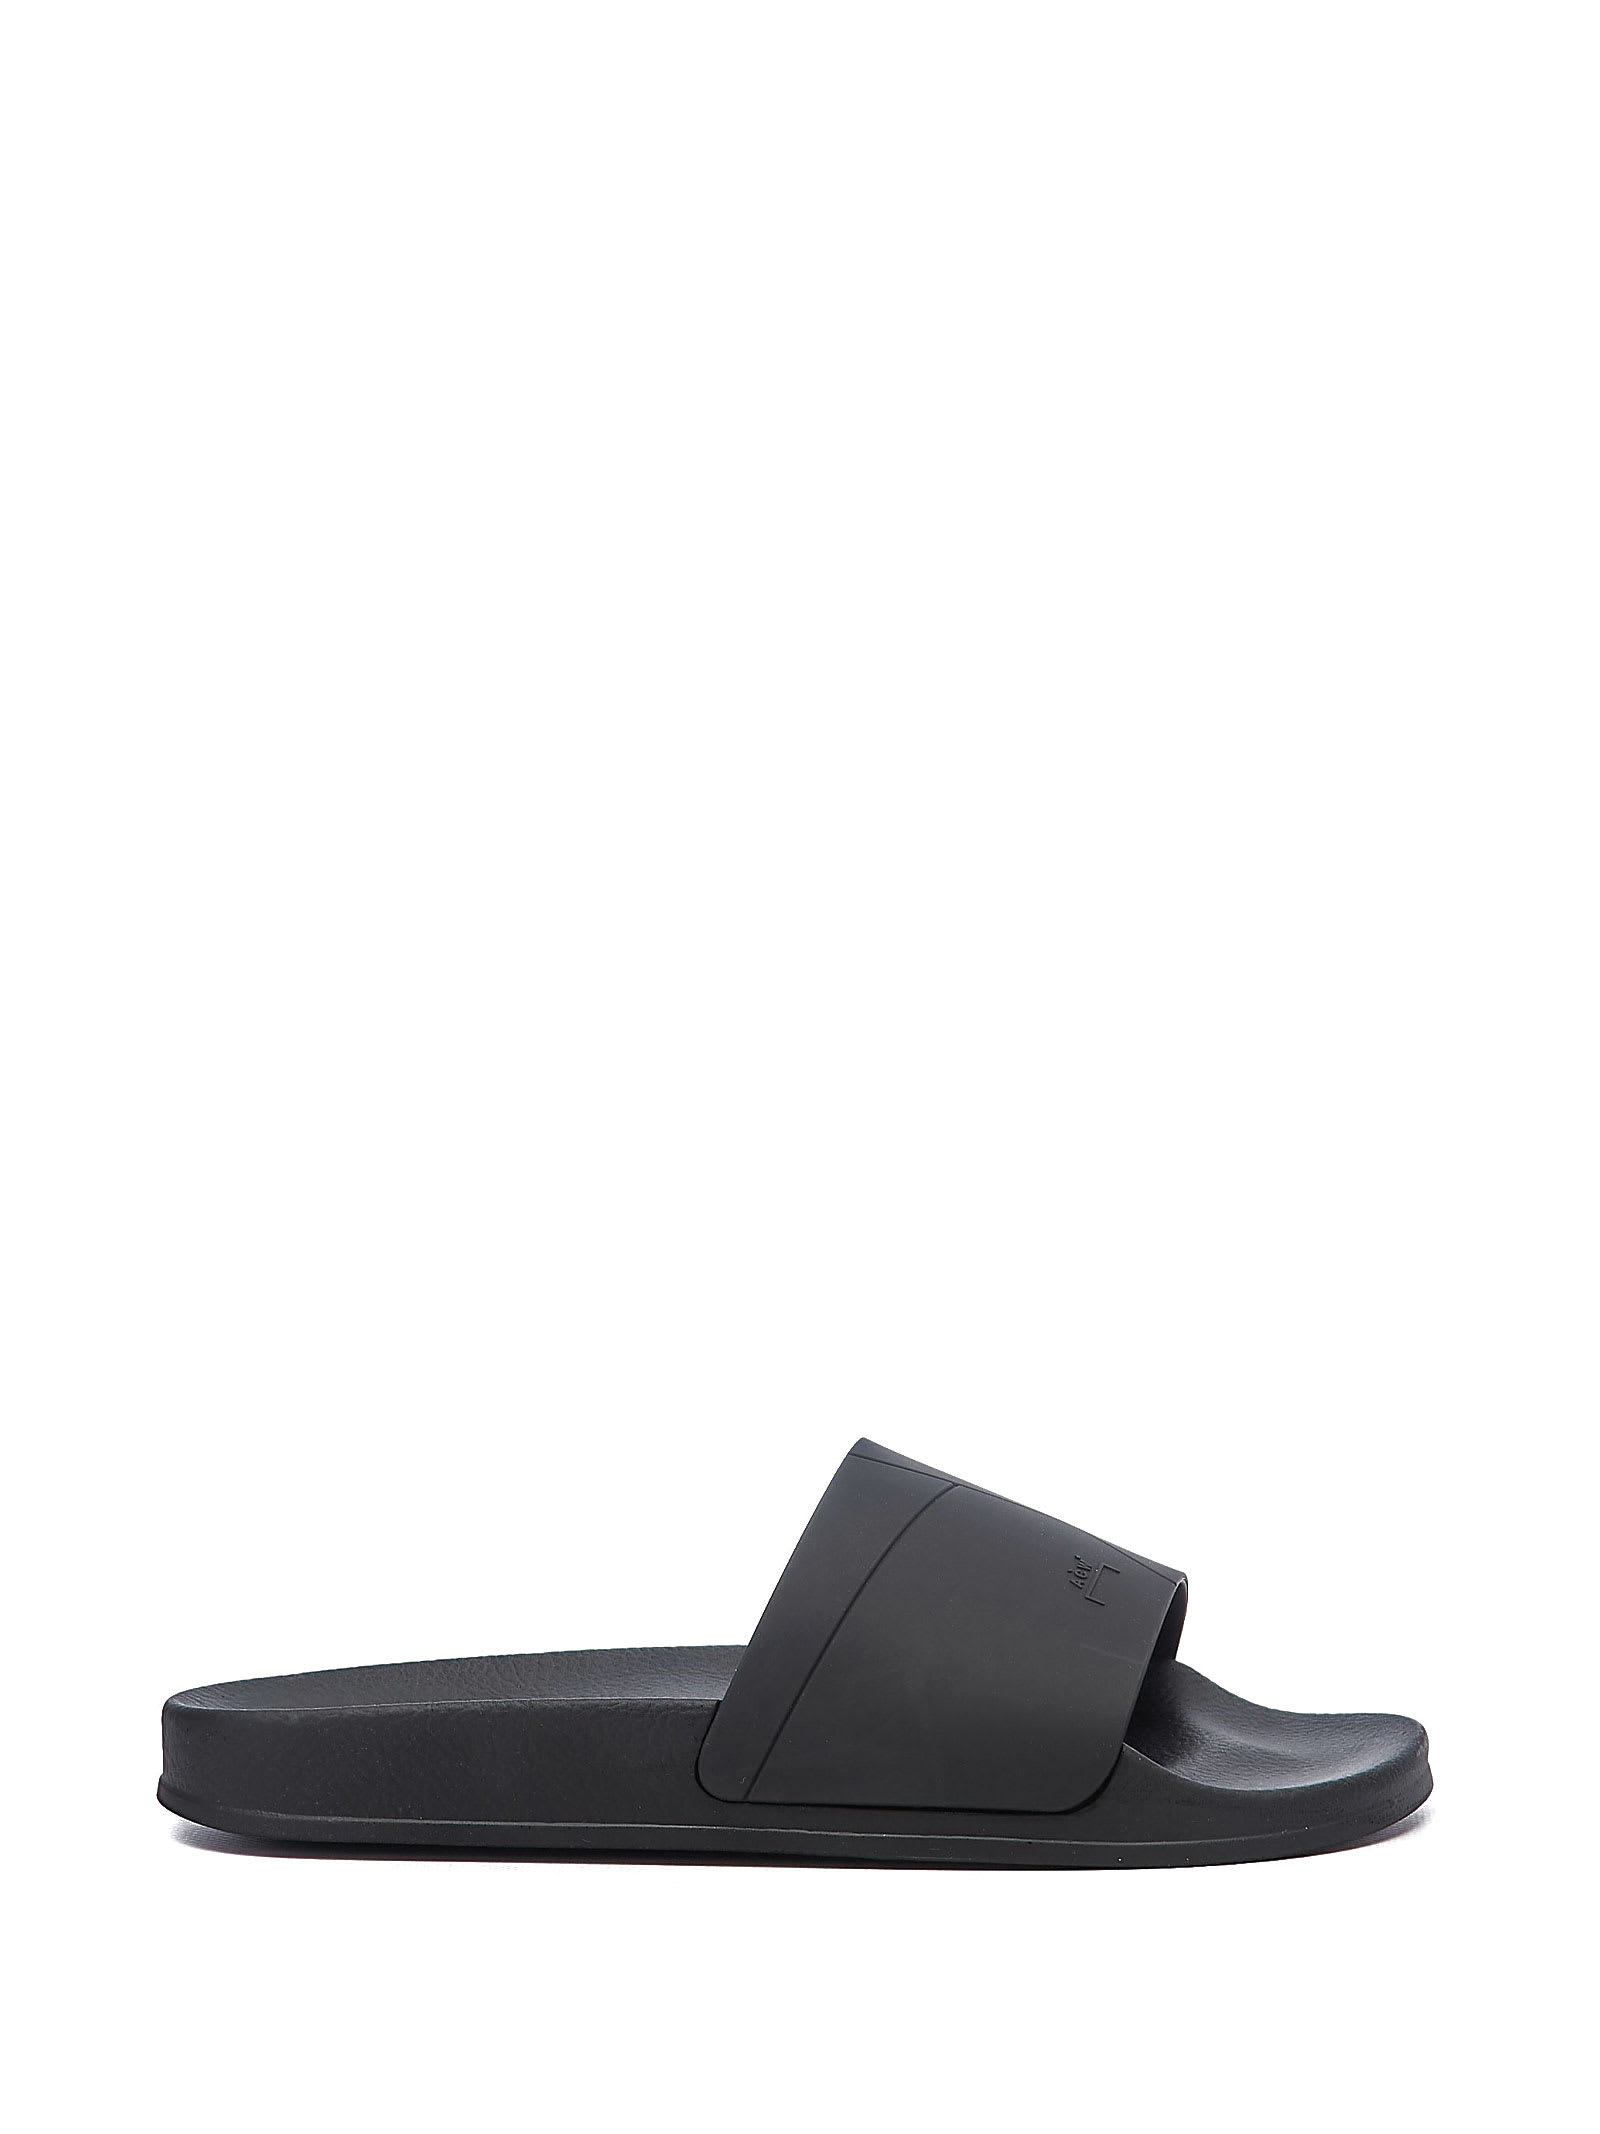 A-COLD-WALL Black Rubber Sandals